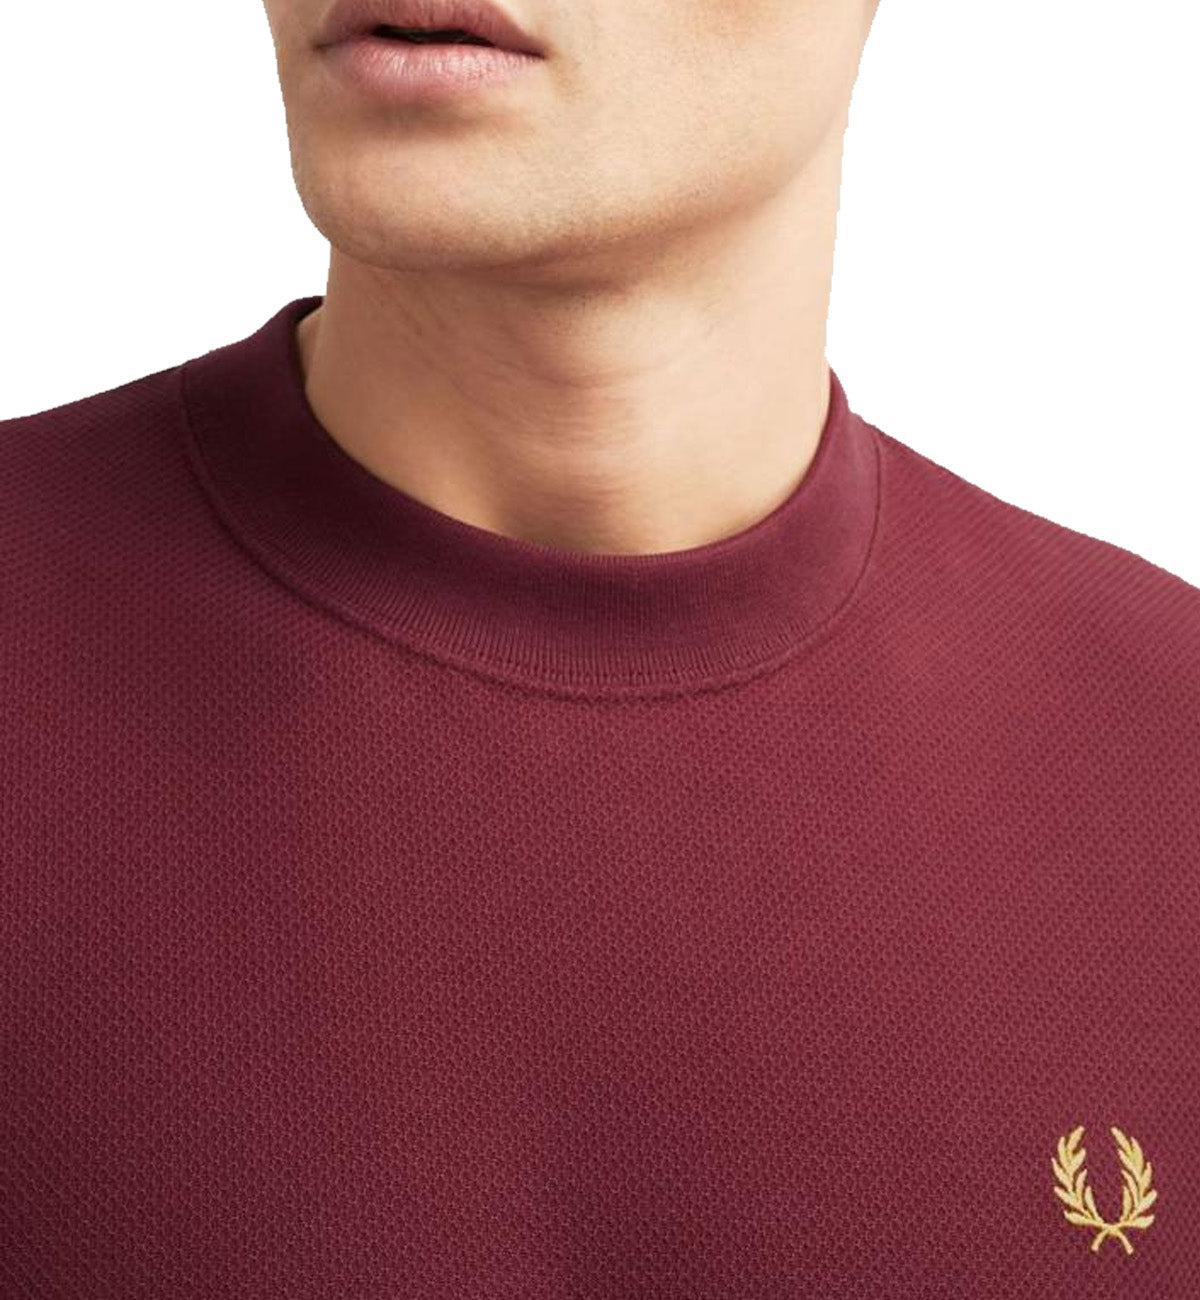 Fred Perry Piqué T-Shirt (Maroon)